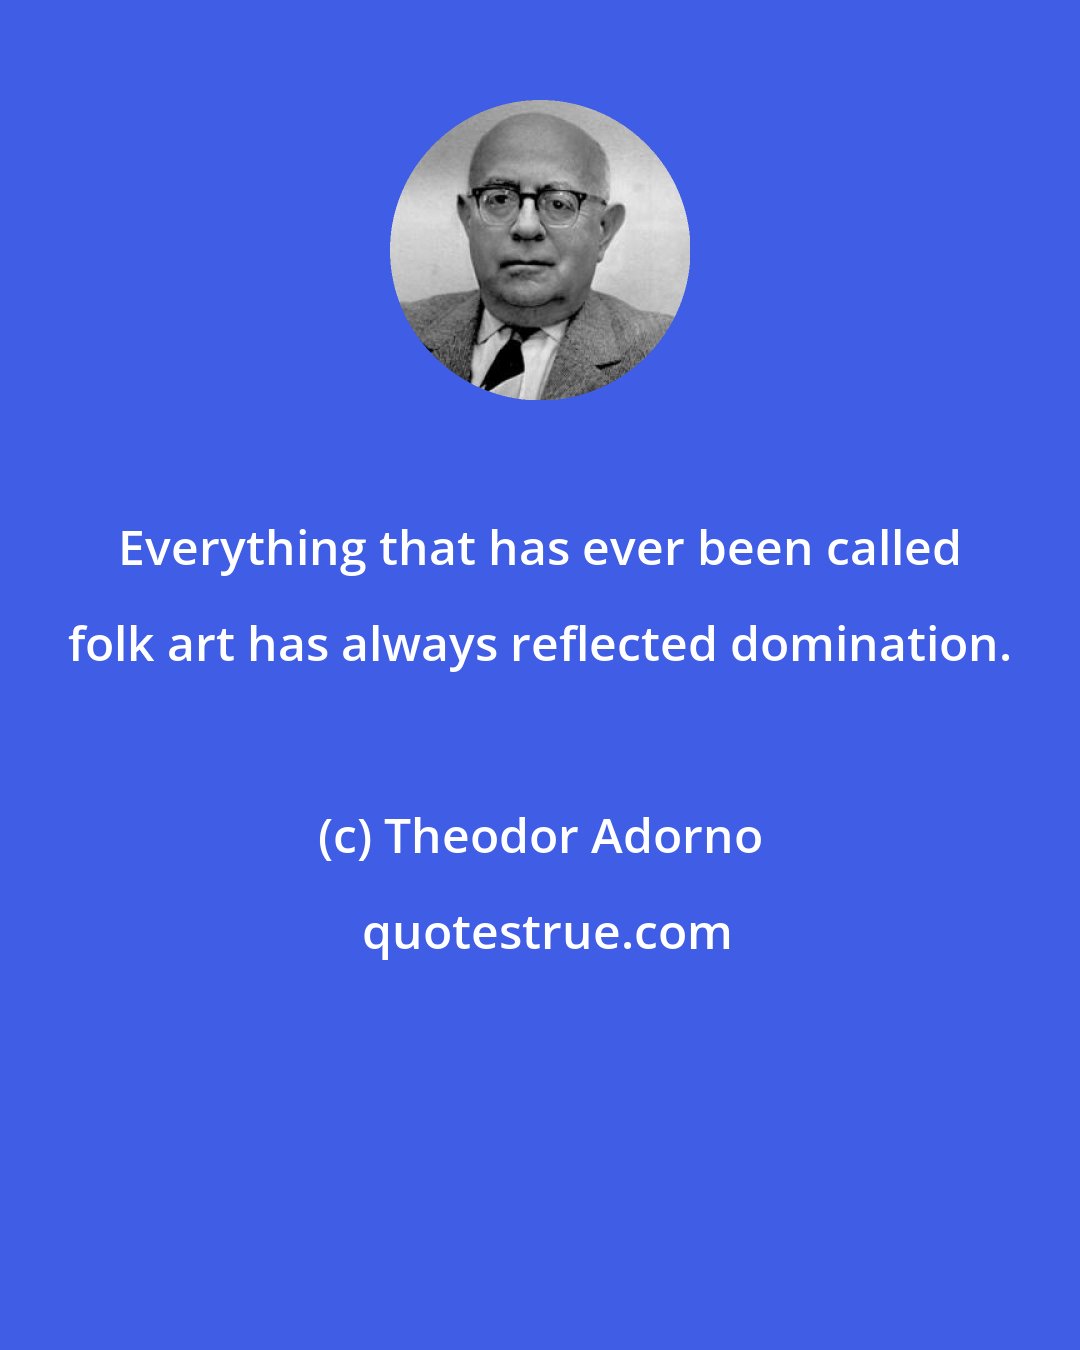 Theodor Adorno: Everything that has ever been called folk art has always reflected domination.